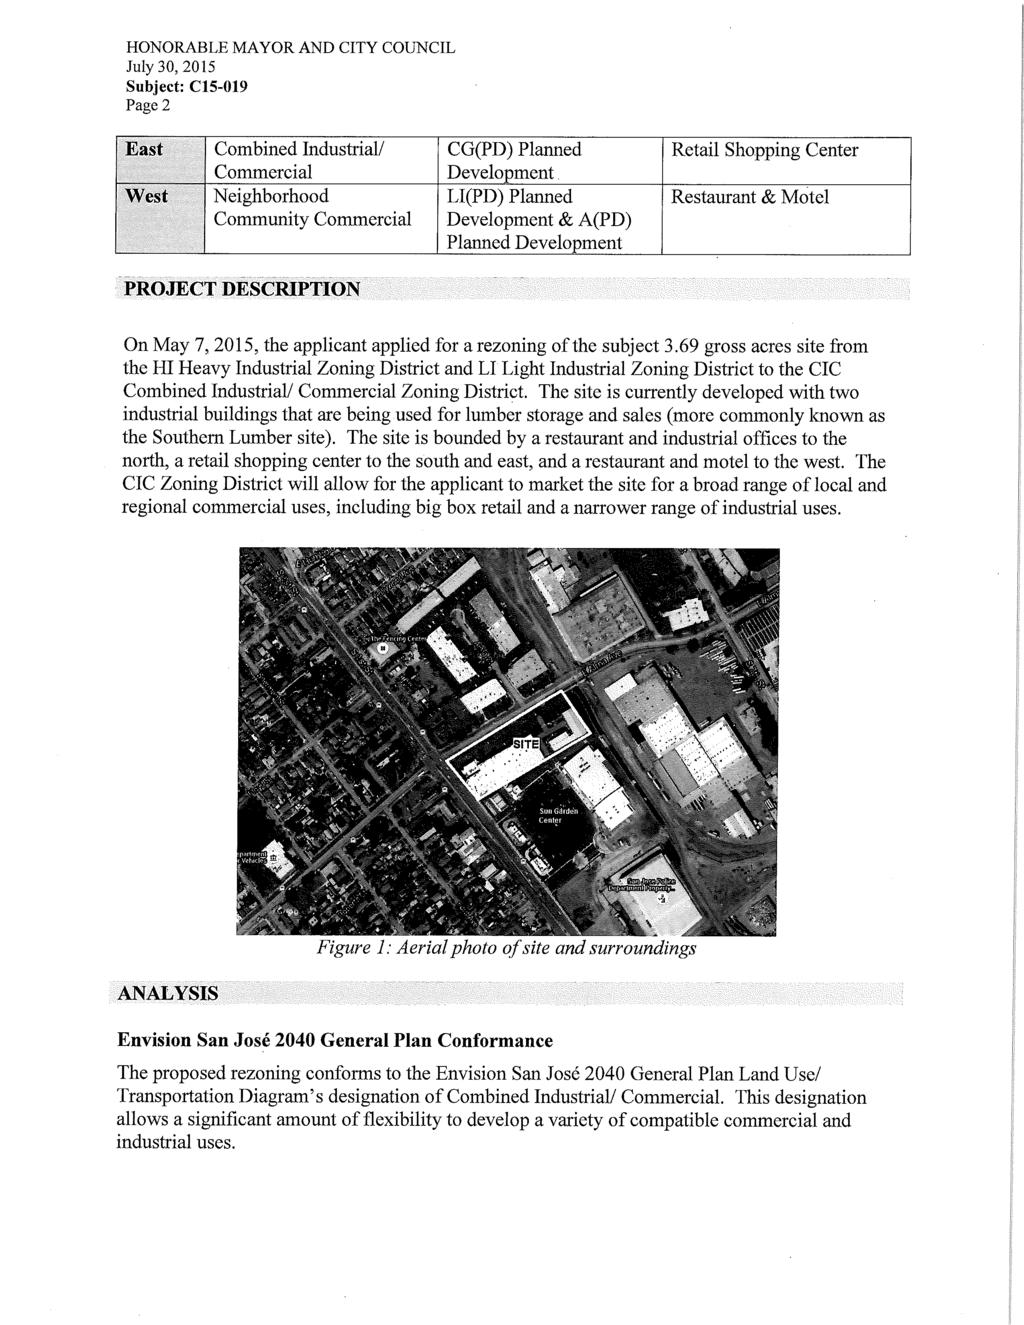 My 30, 2015 Page 2 East West Combined Industrial/ Commercial Neighborhood Community Commercial CG(PD) Planned Development LI(PD) Planned Development & A(PD) Planned Development Retail Shopping Center